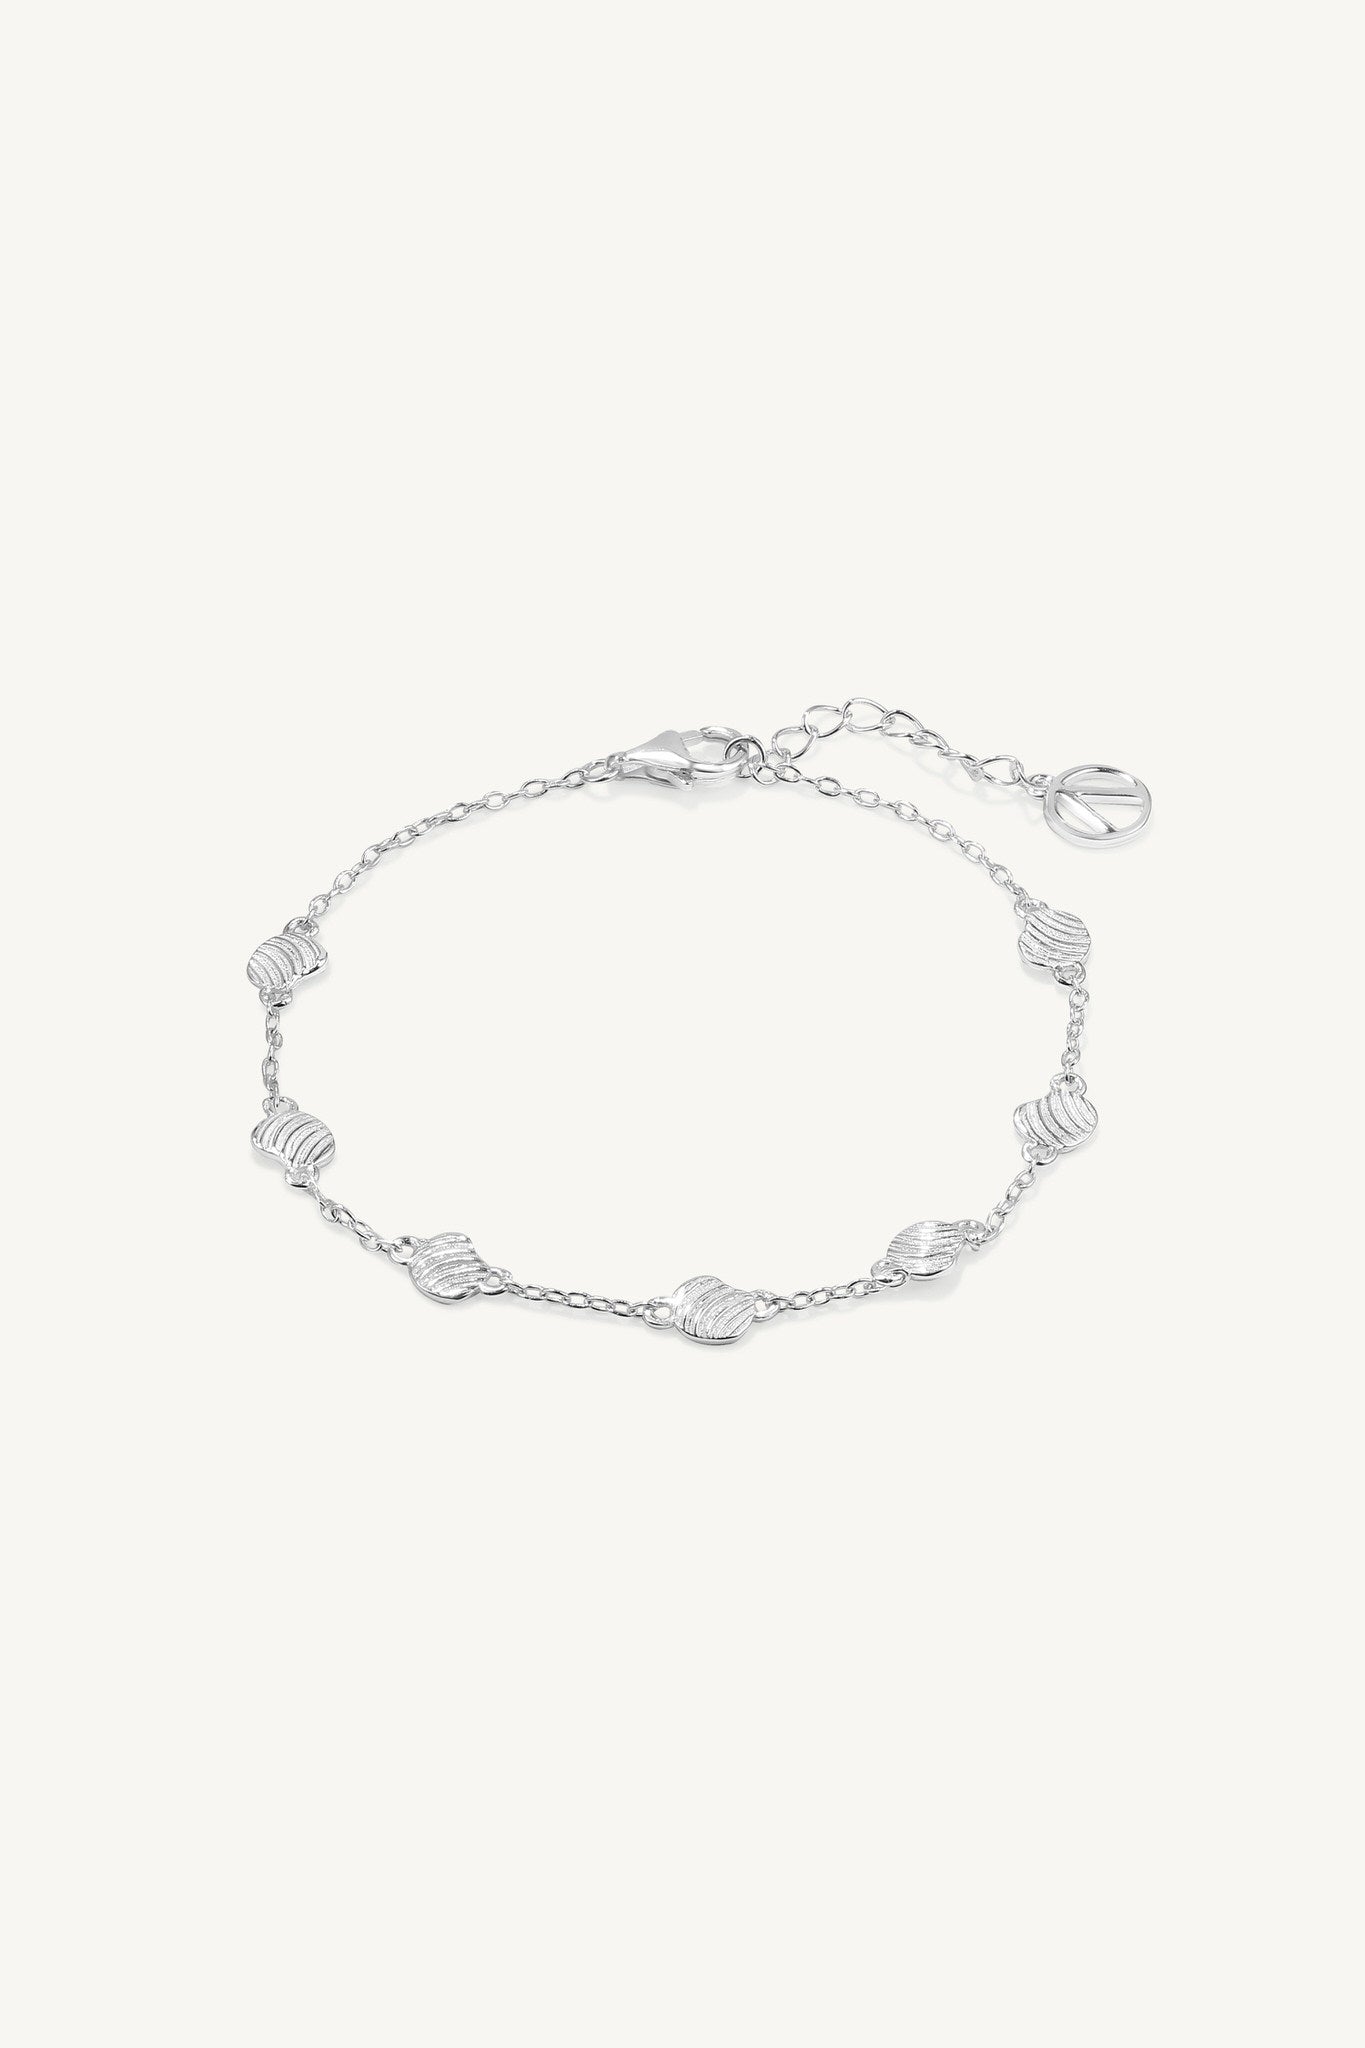 Engraved Shell Lines Chain Bracelet Sterling Silver